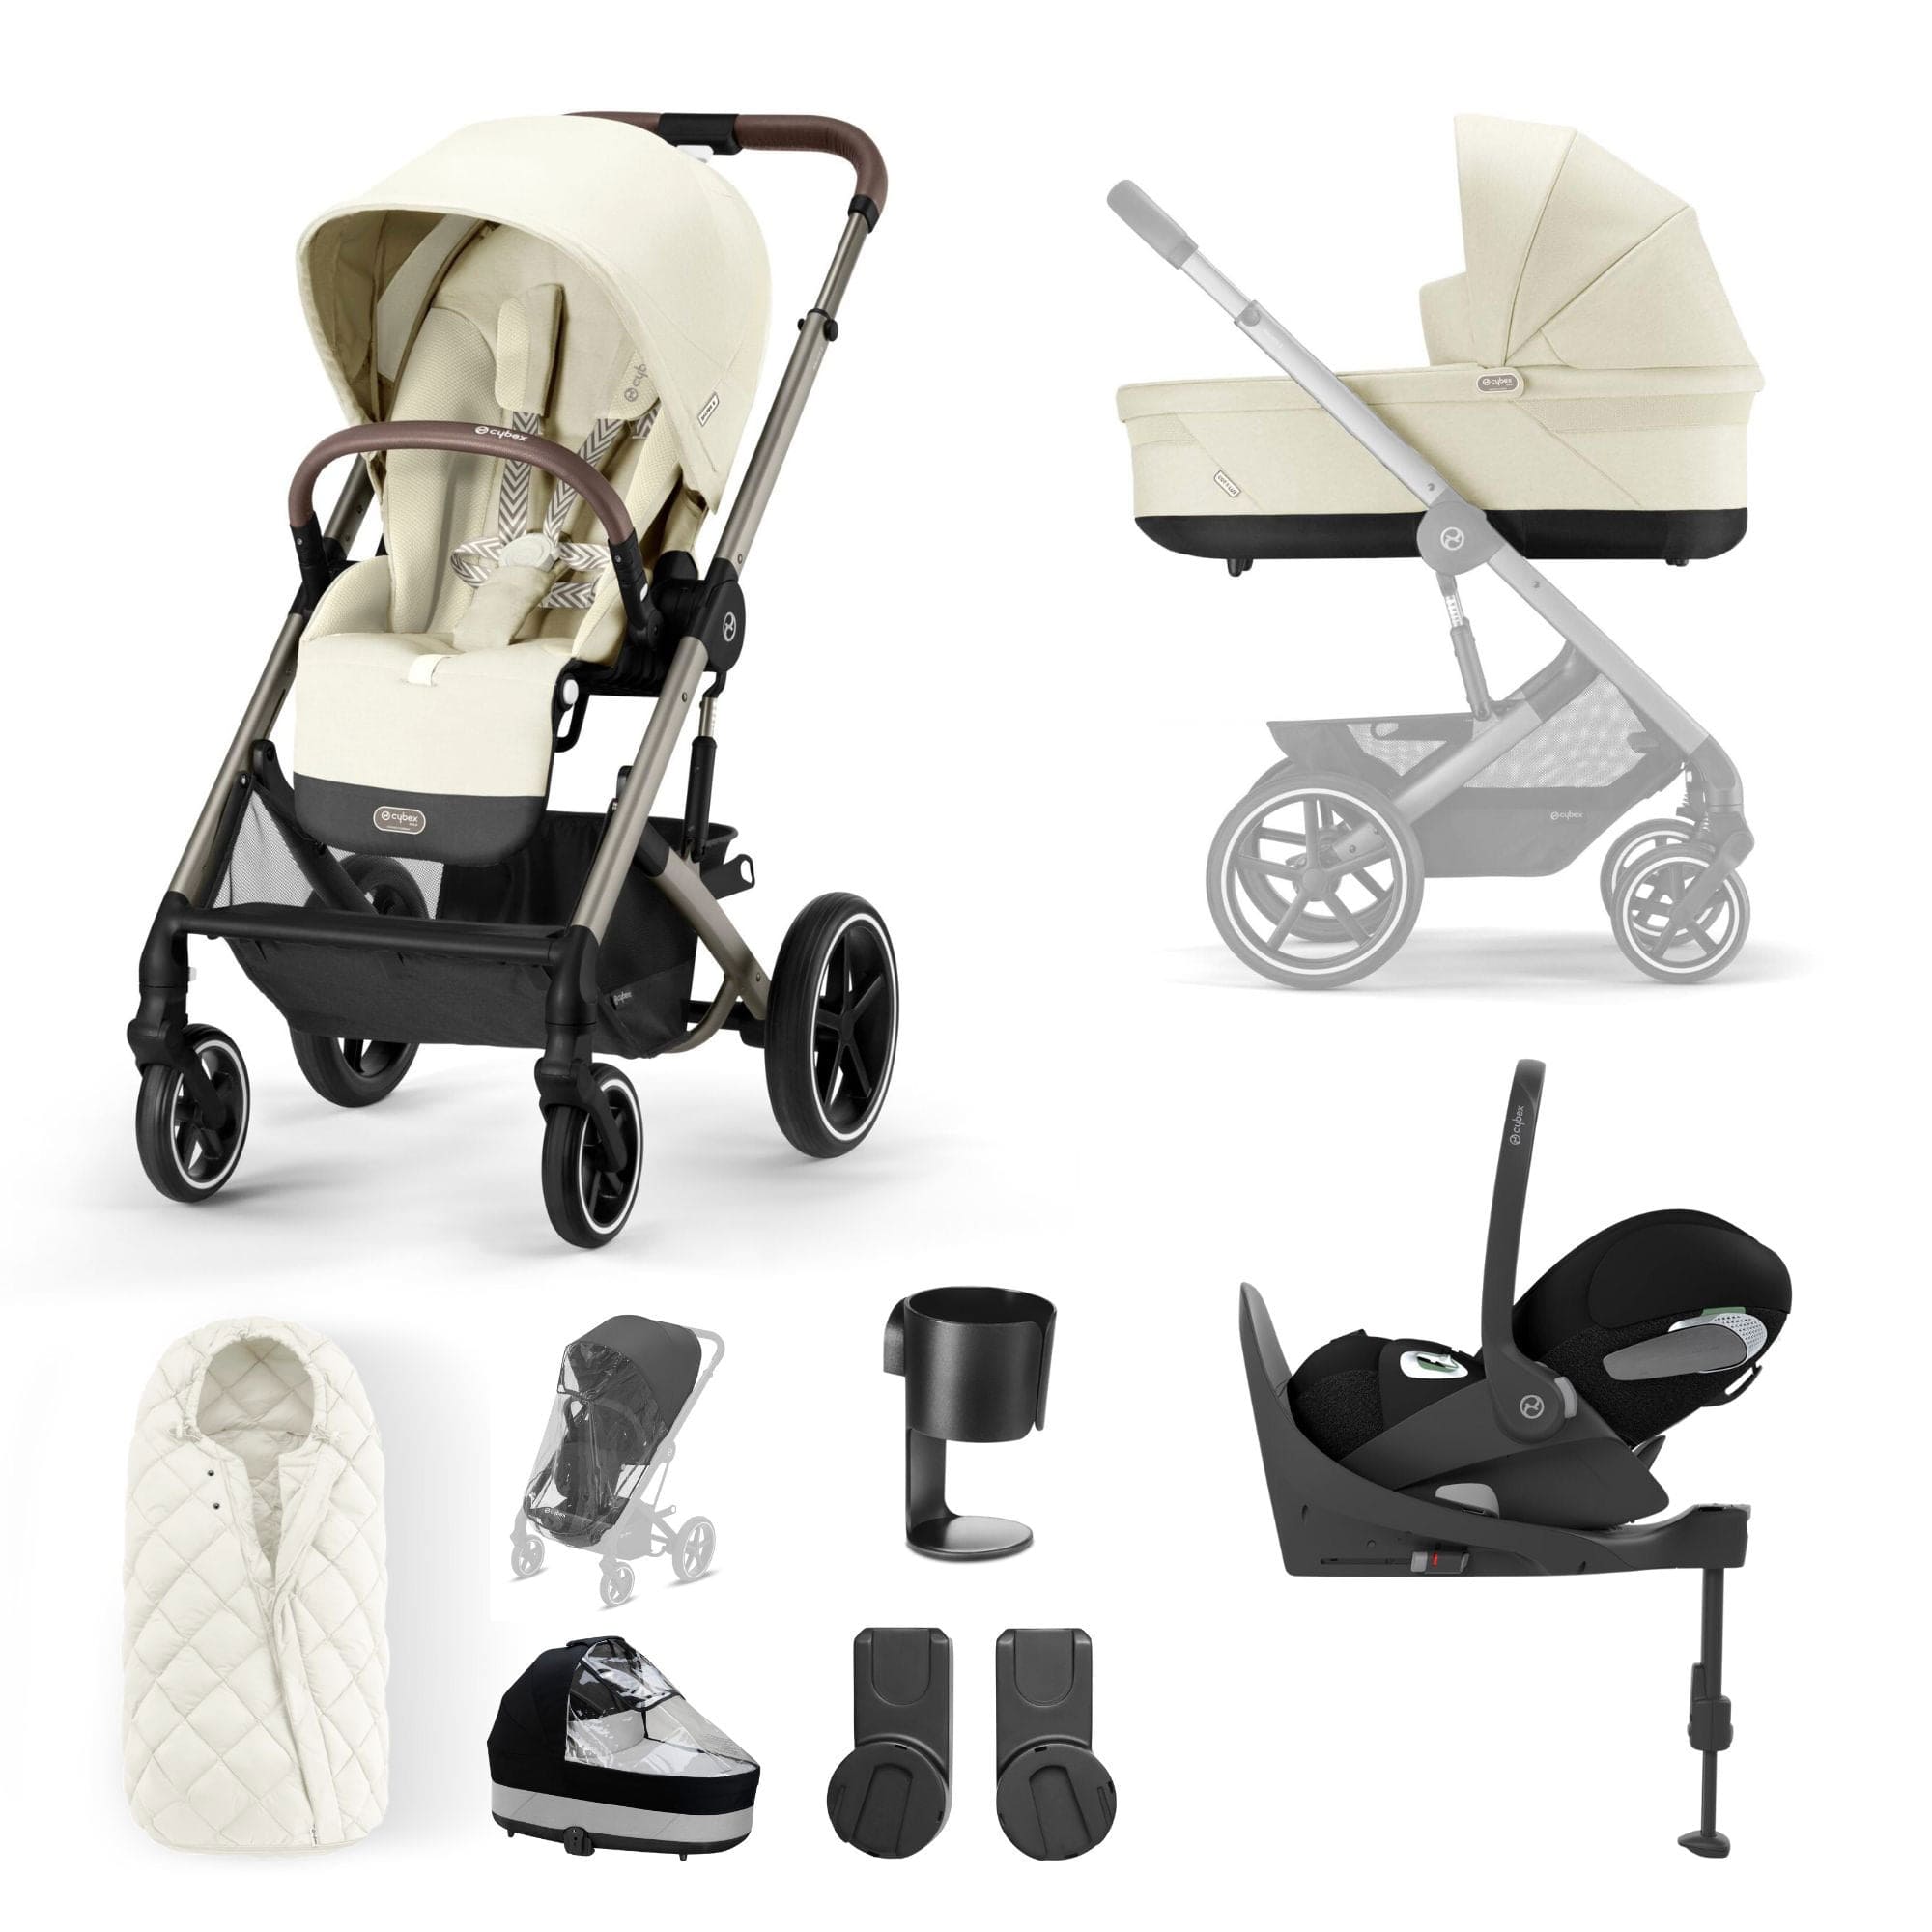 Cybex Balios S Lux Luxury Bundle in Taupe/Seashell Beige Travel Systems 127462-TPE-SEA-BEI 4063846318124